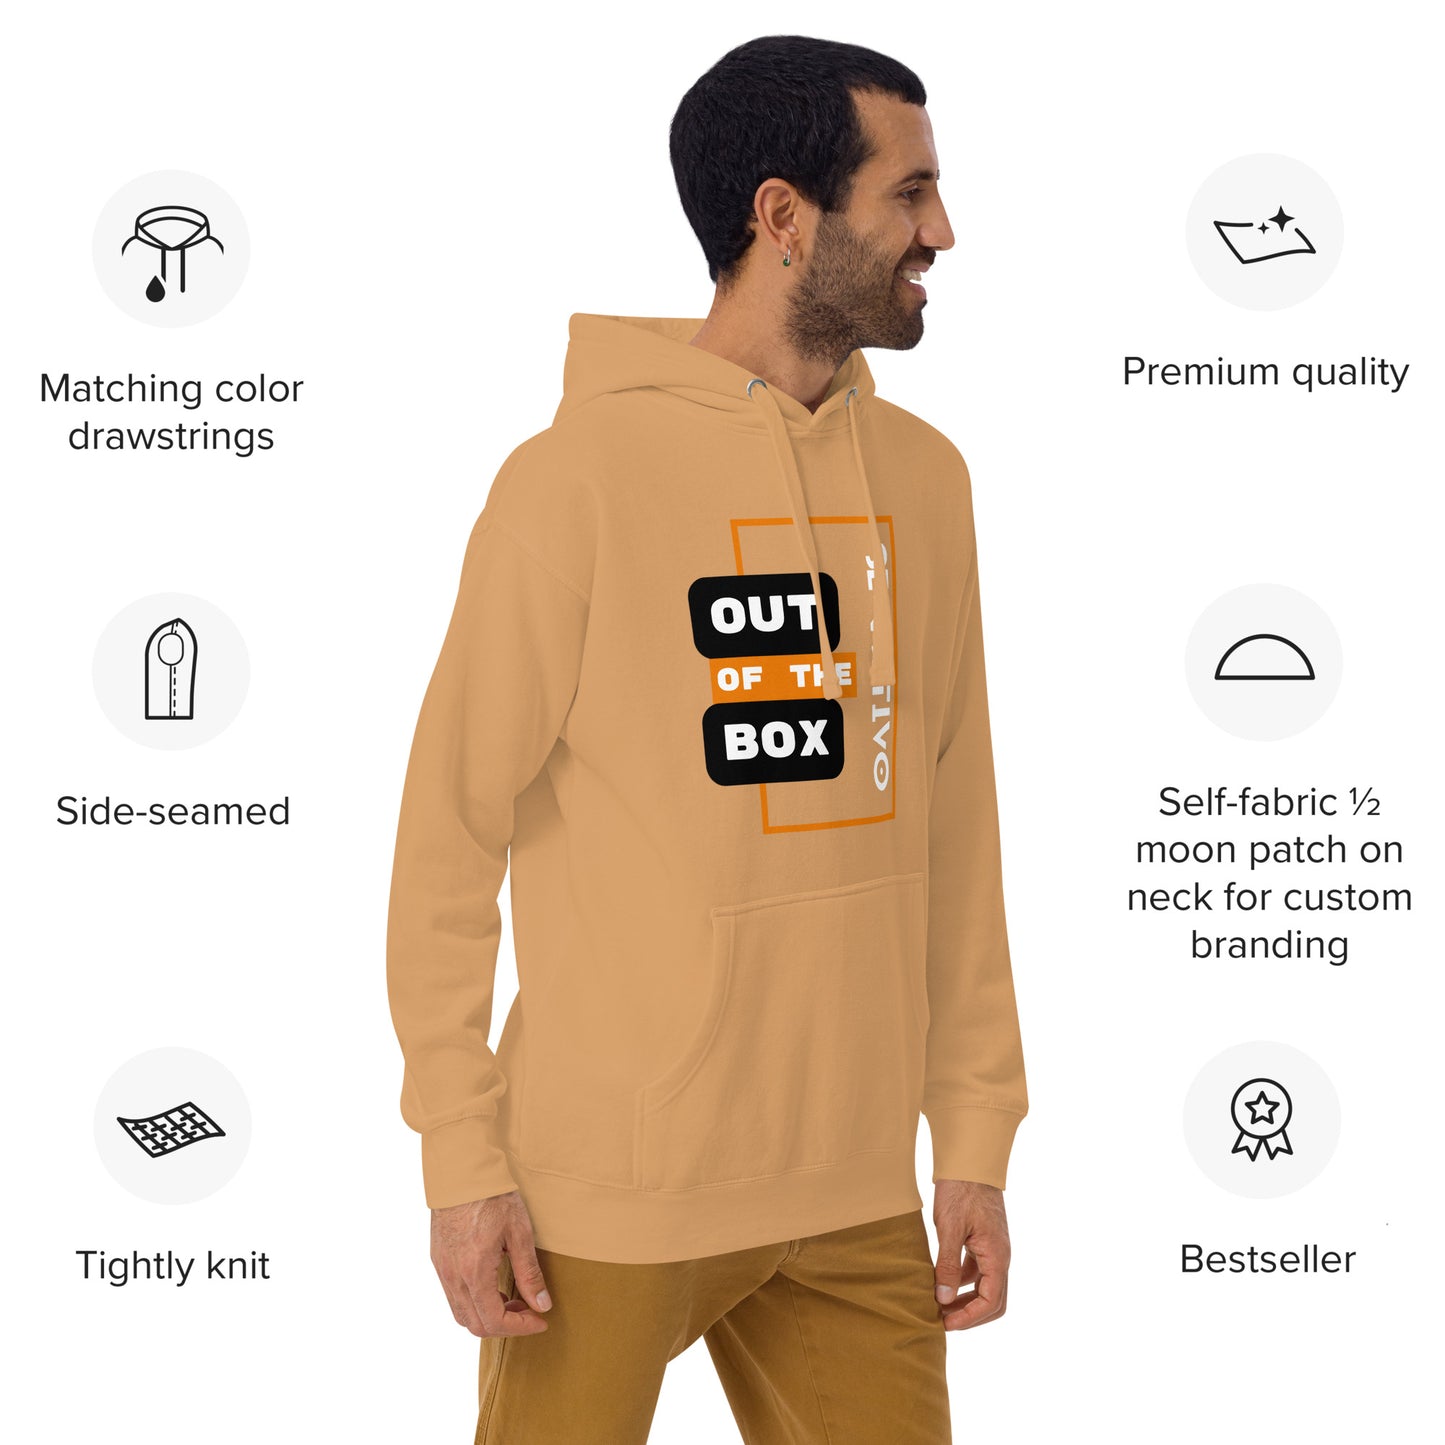 Out of The Box Unisex Hoodie